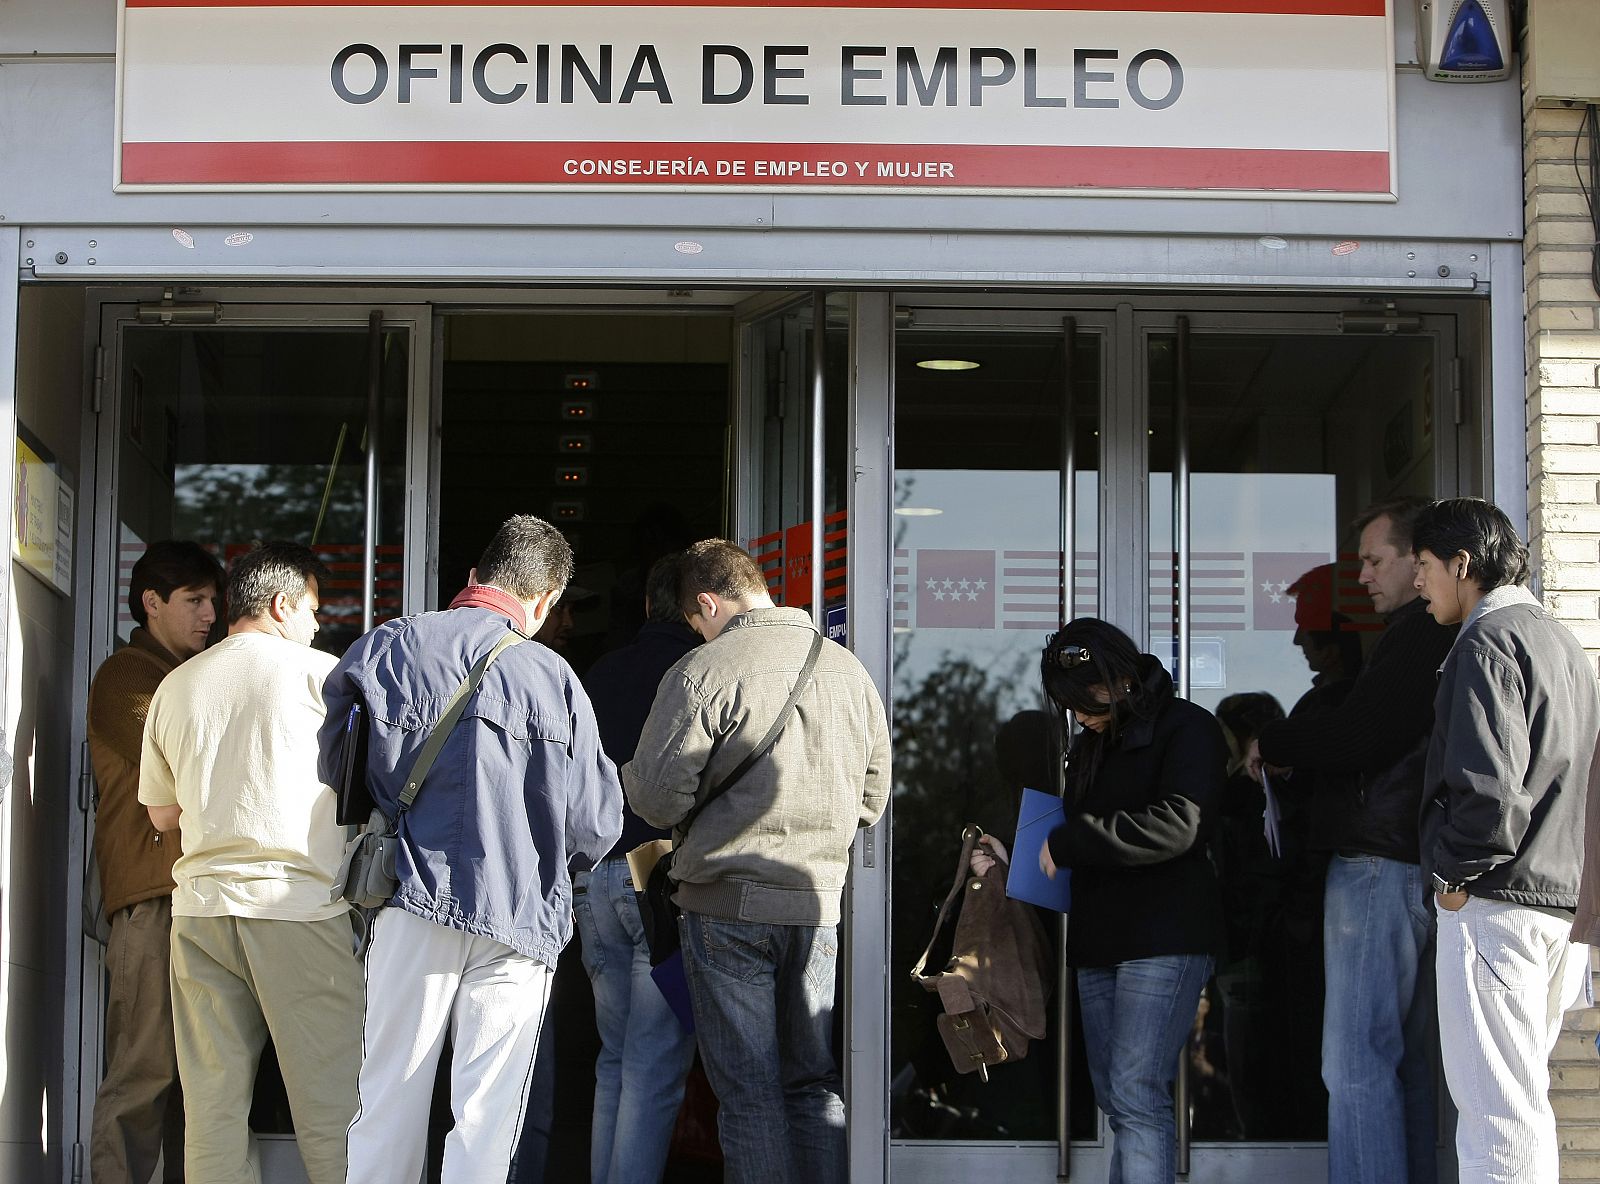 People line up to enter a government job centre in Madrid